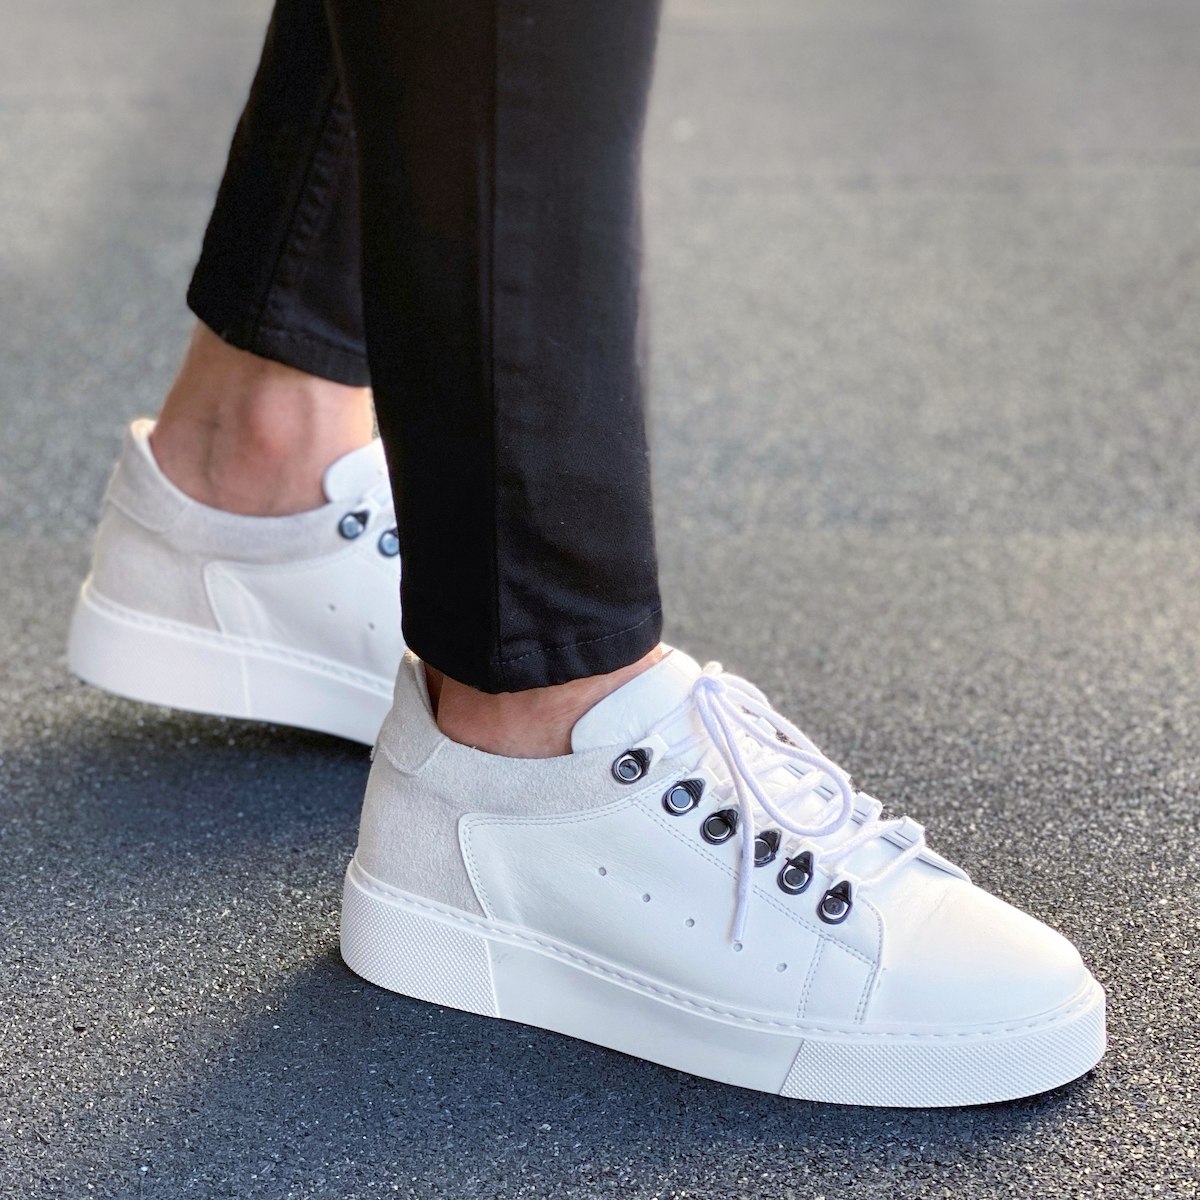 Men’s Leather Sneakers Shoes White